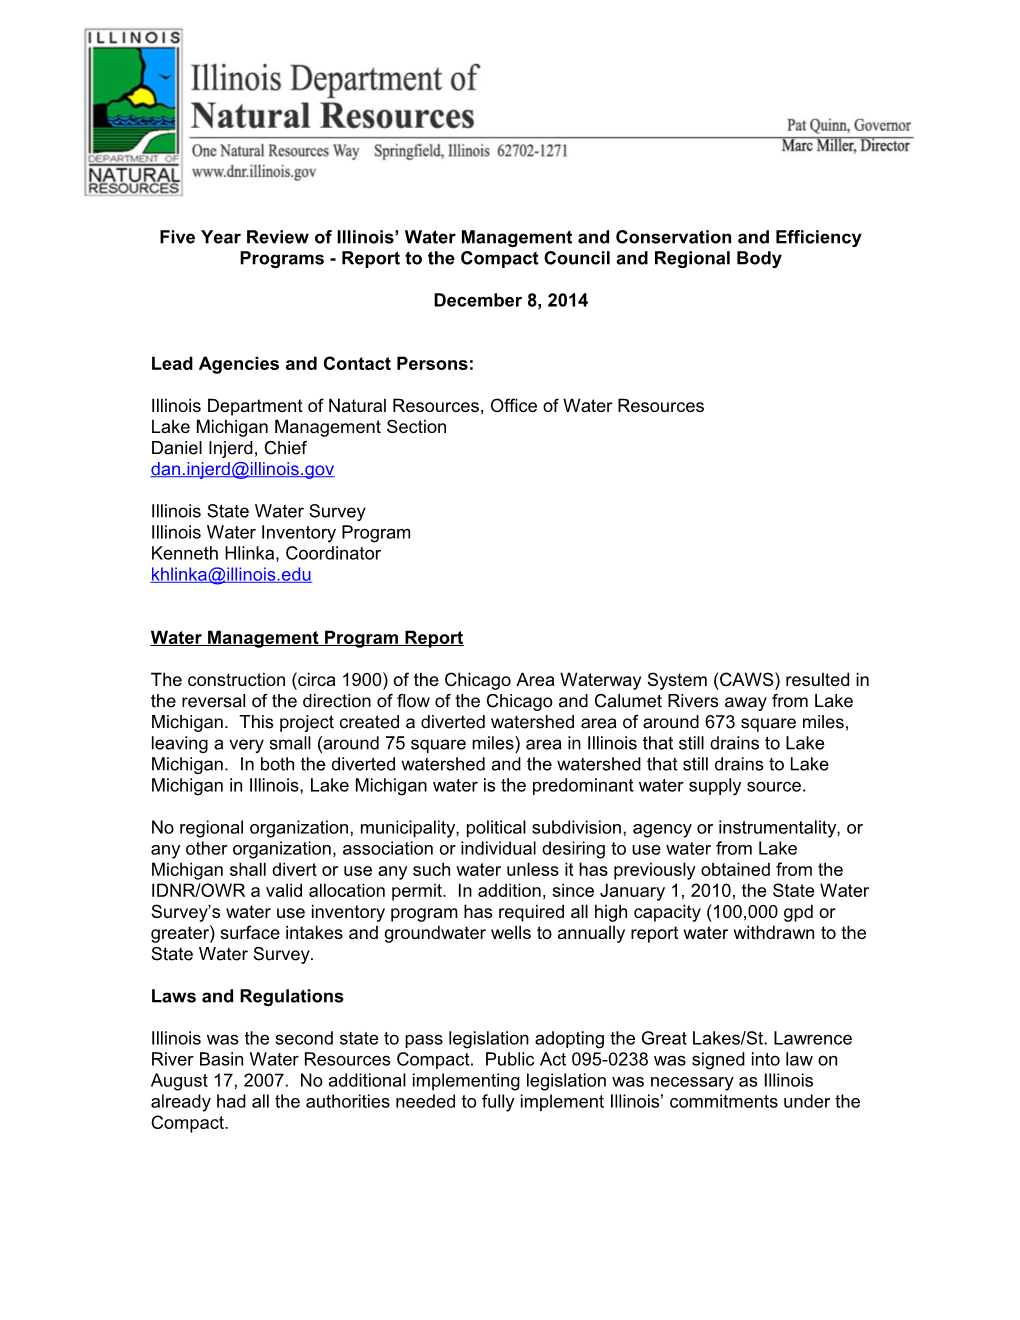 Water Management Program Review